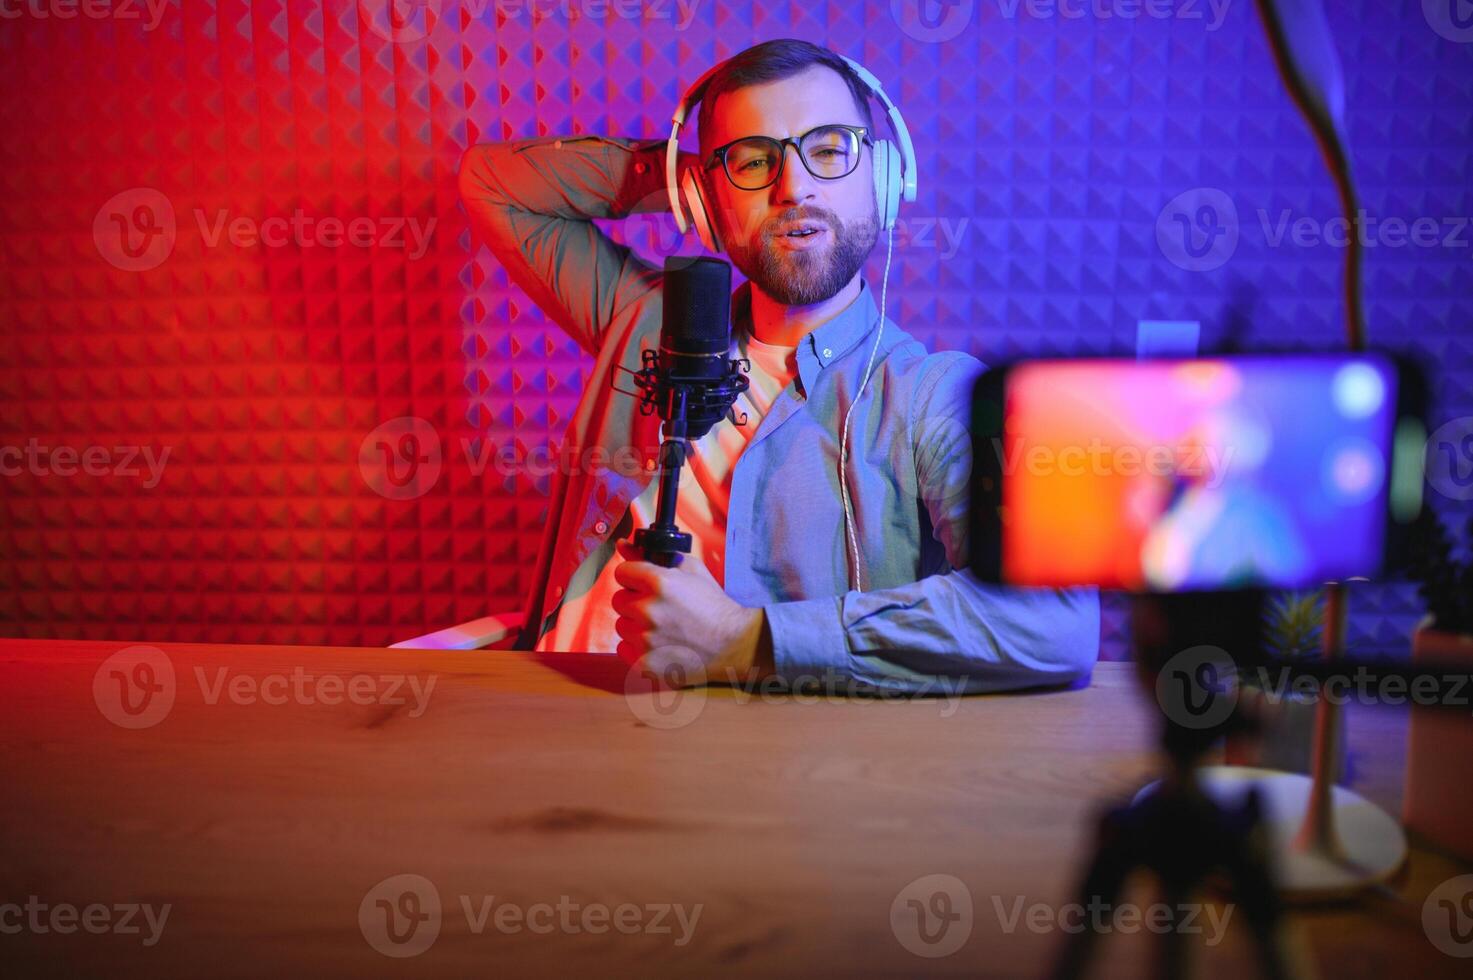 A video blogger records content in his studio. The backstage photo was taken from behind one of the participants in the shooting, at the beginning of the shooting when the blogger is preparing.